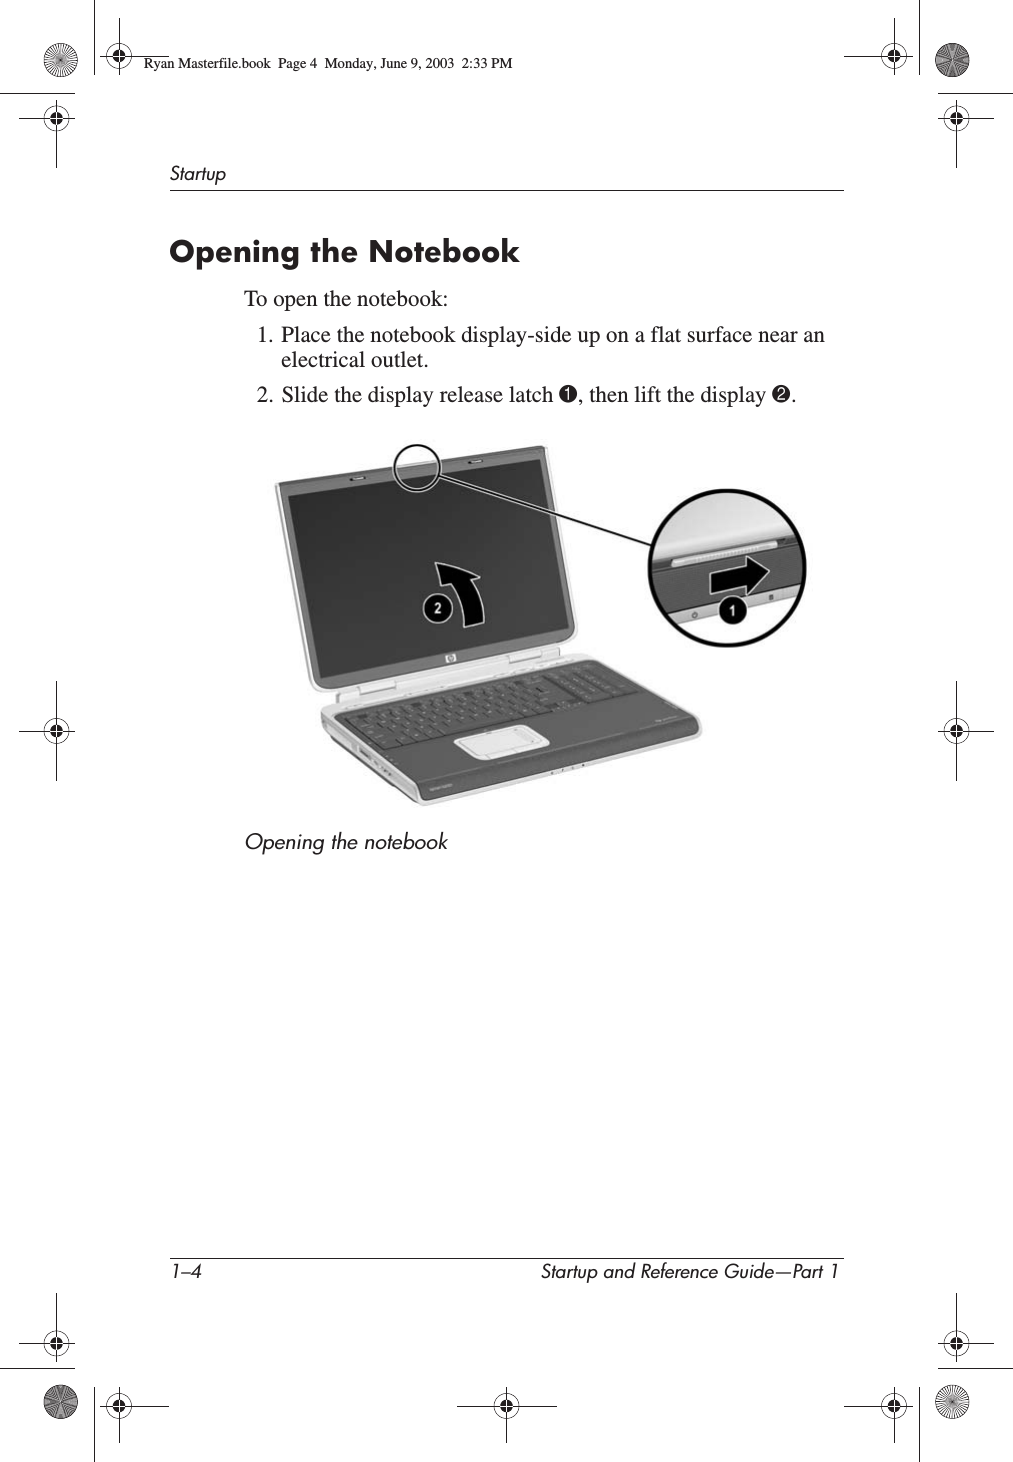 1–4 Startup and Reference Guide—Part 1StartupOpening the NotebookTo open the notebook:1. Place the notebook display-side up on a flat surface near an electrical outlet.2. Slide the display release latch 1, then lift the display 2.Opening the notebookRyan Masterfile.book  Page 4  Monday, June 9, 2003  2:33 PM